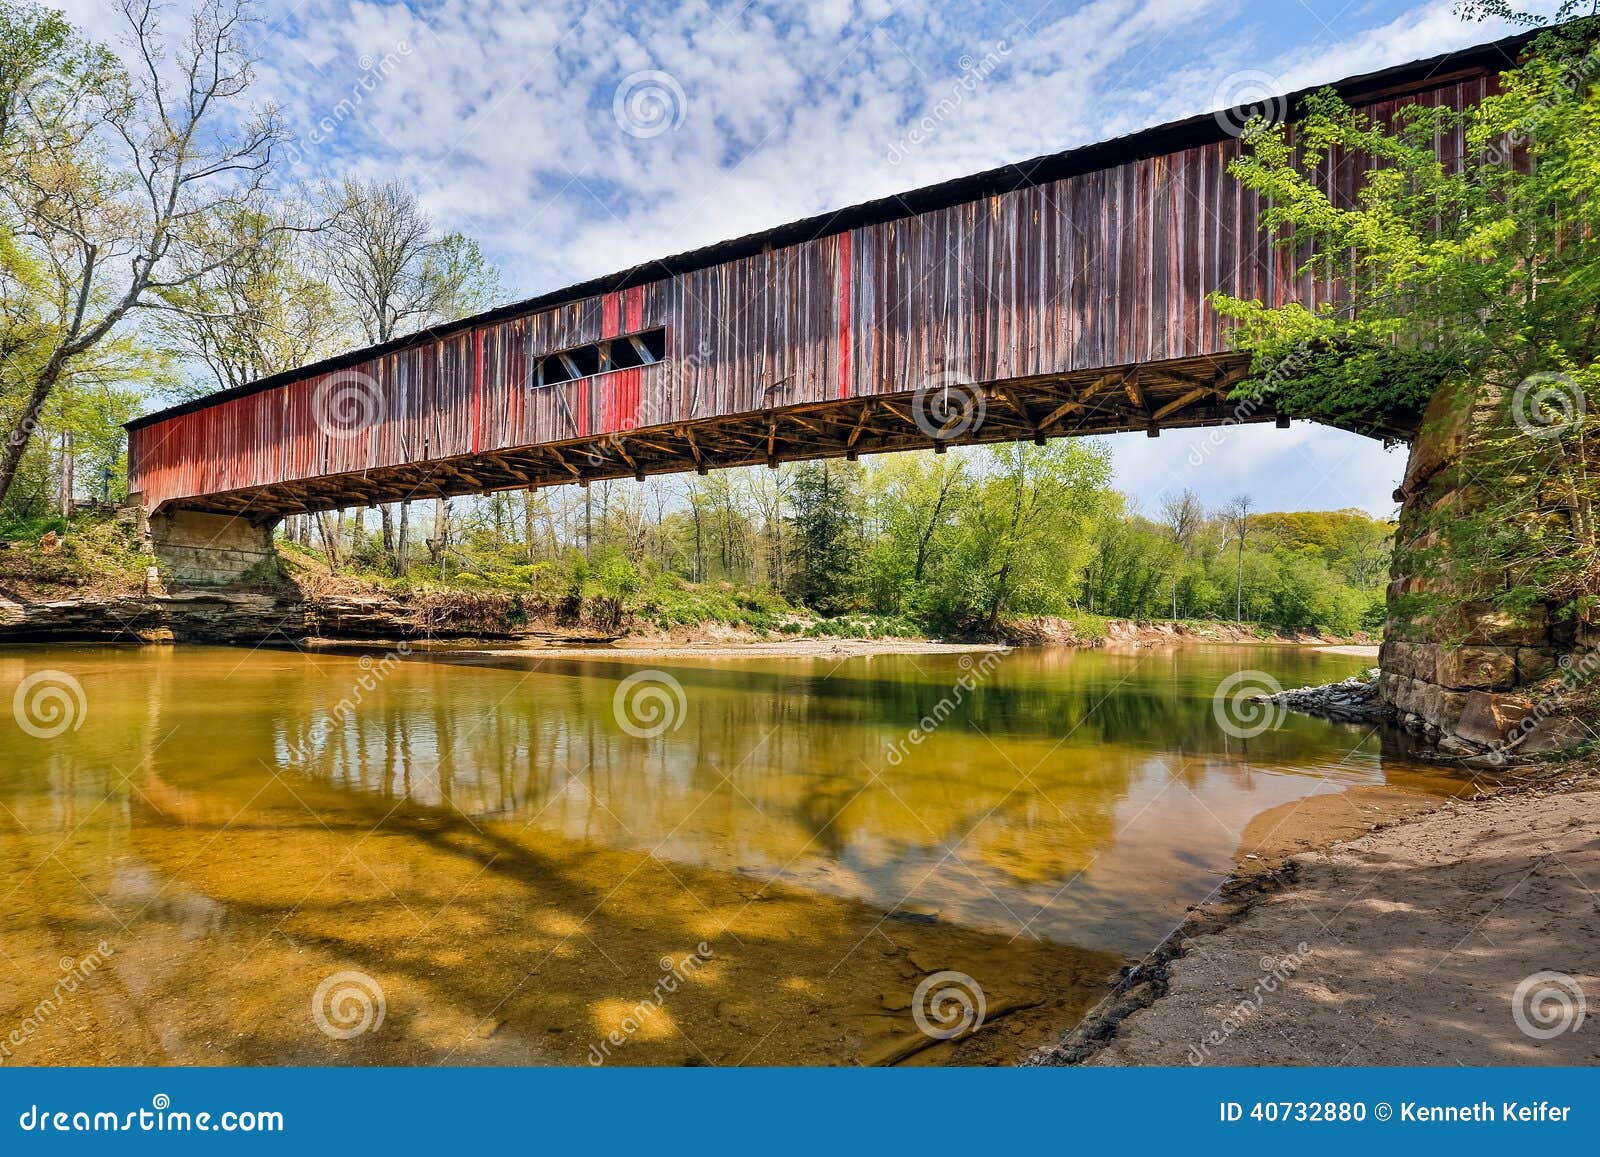 covered bridge at cox ford